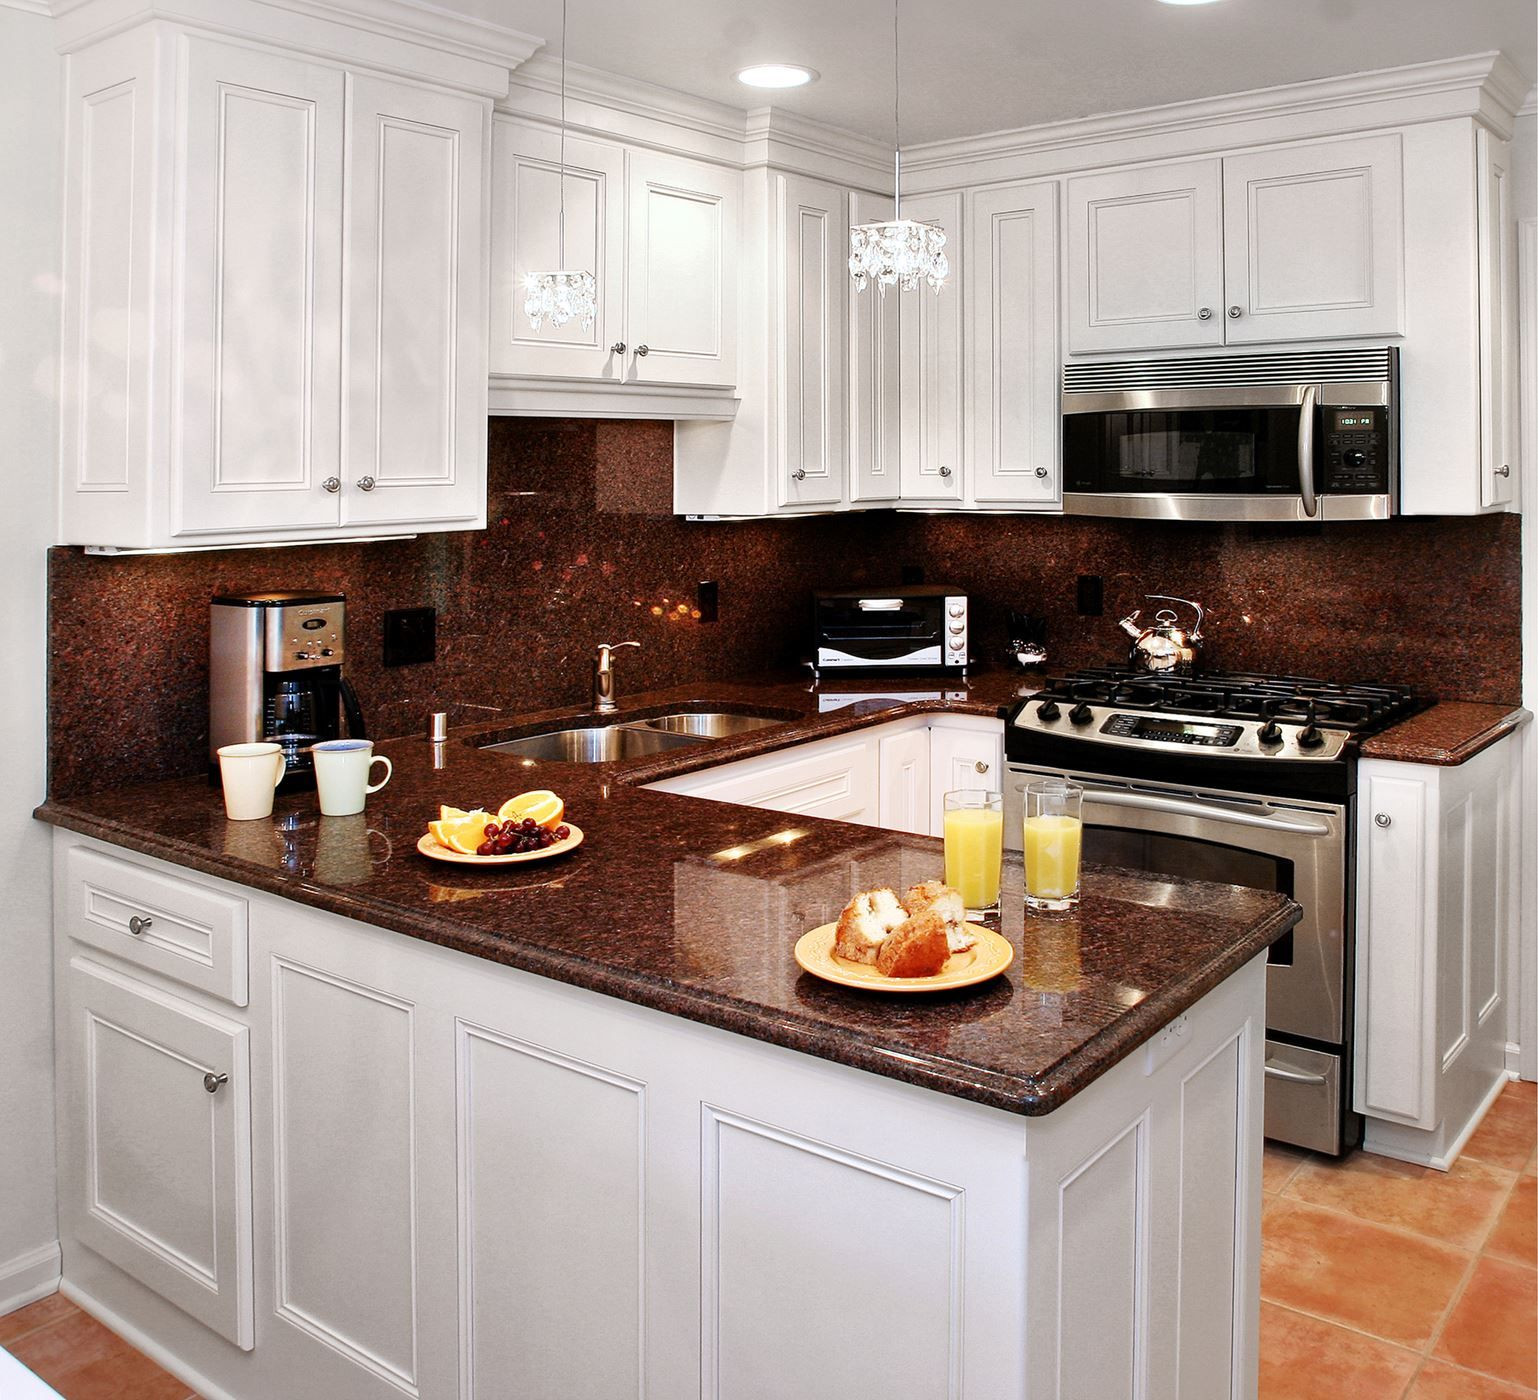 Kitchen Counter Space Saver
 Space Saver Gallery